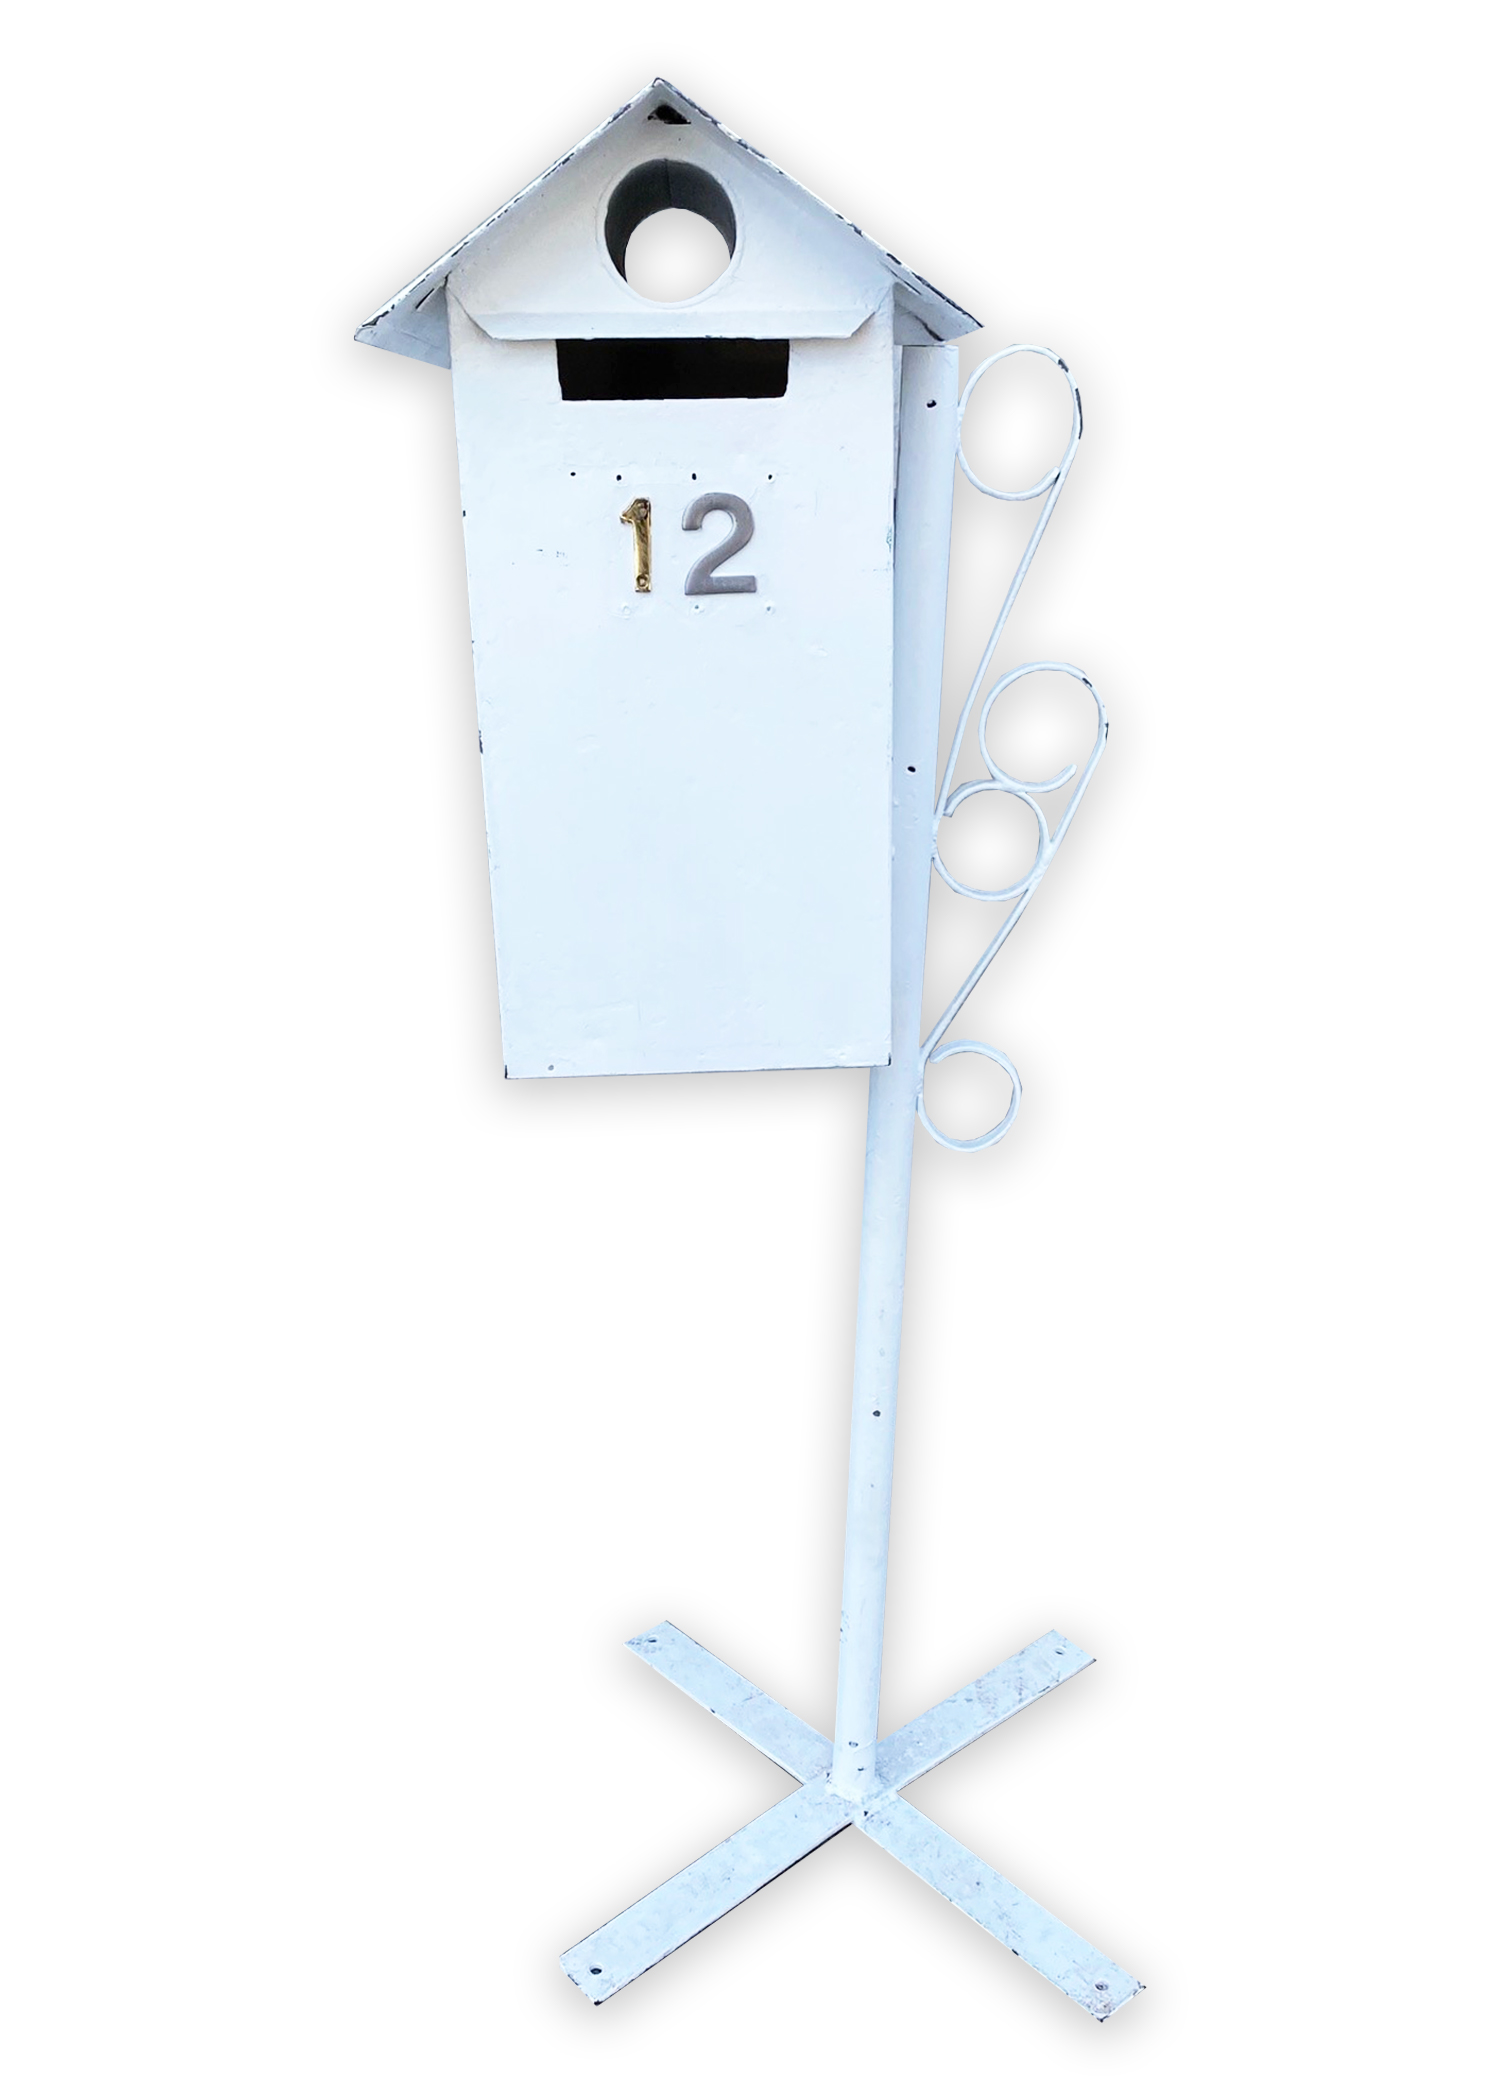 Letterbox White on Stand (H: 1.25m)